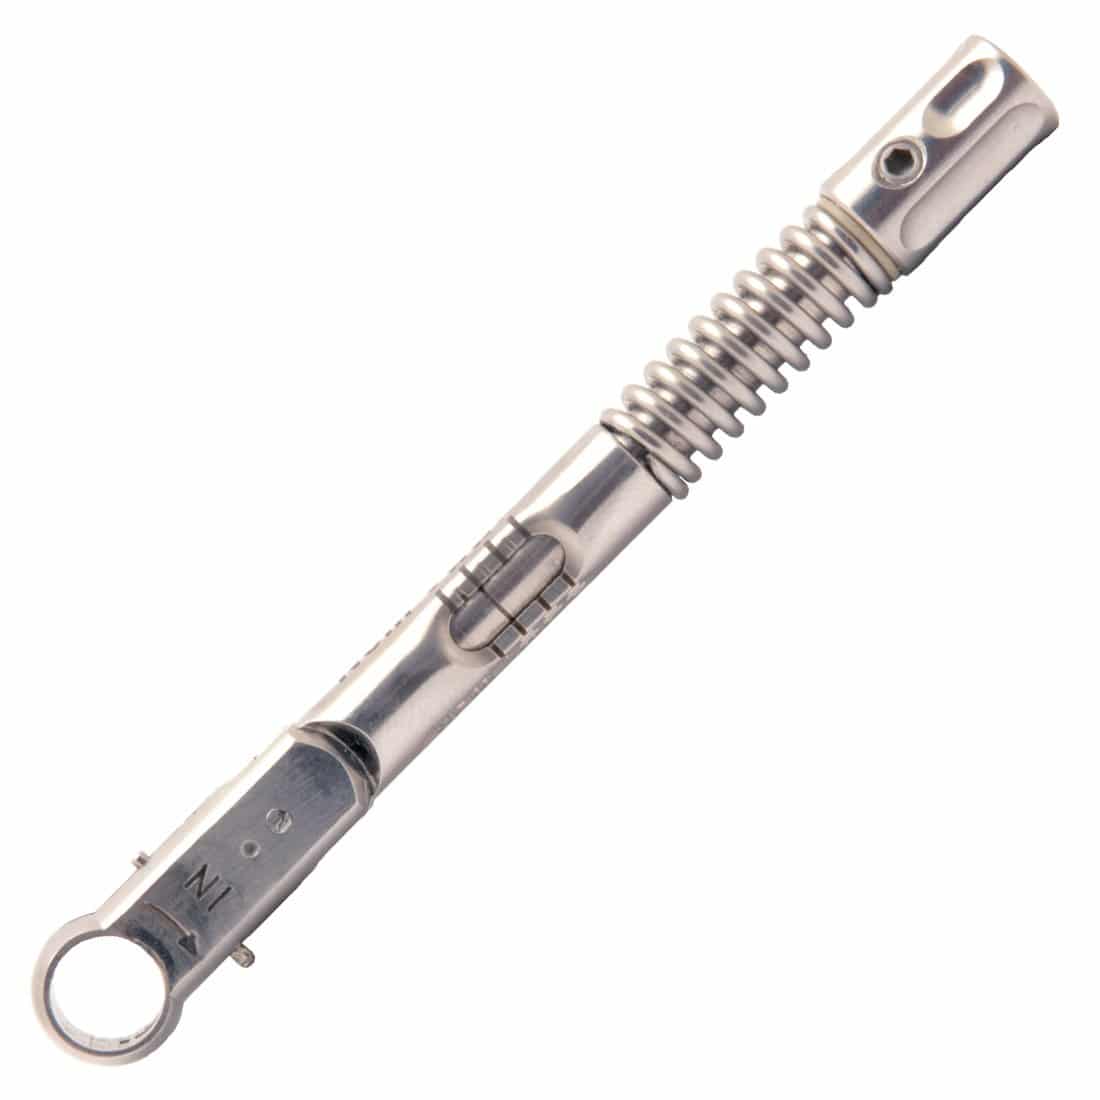 Universal Surgical and Restorative Ratchet with Torque 10-45N.cm